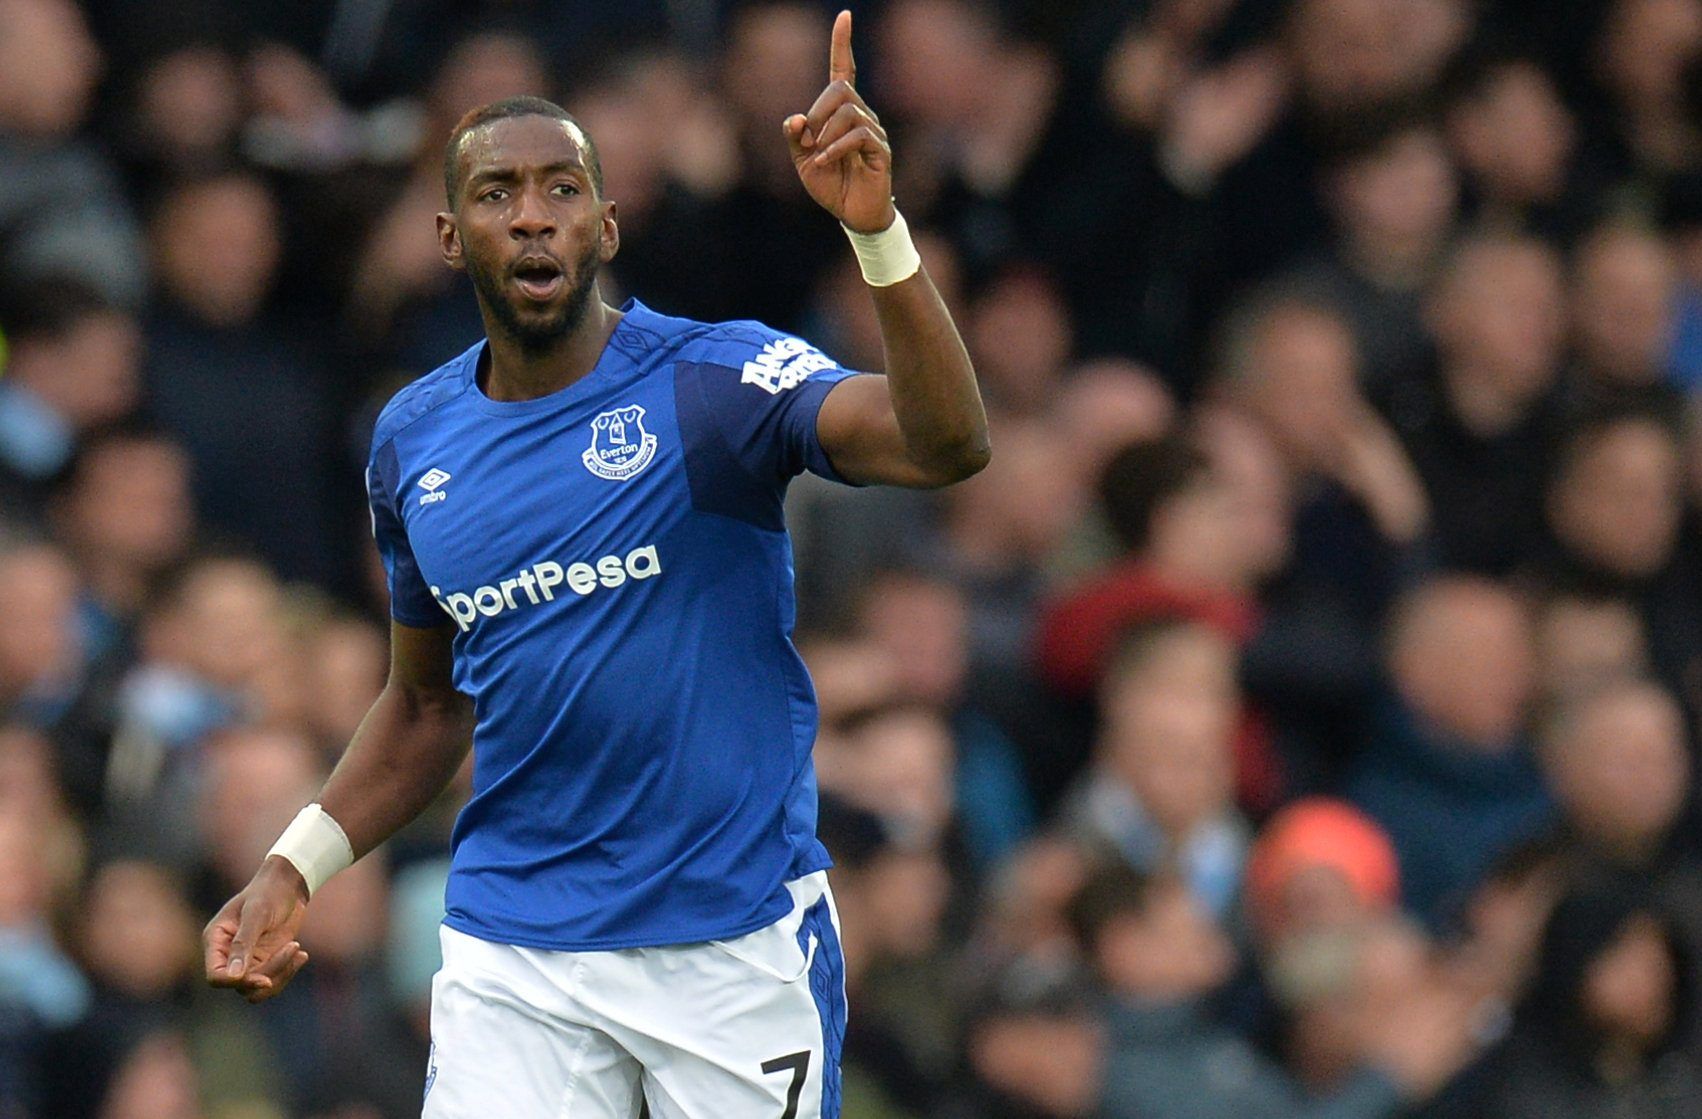 Soccer Football - Premier League - Everton vs Manchester City - Goodison Park, Liverpool, Britain - March 31, 2018   Everton's Yannick Bolasie celebrates scoring their first goal     REUTERS/Peter Powell    EDITORIAL USE ONLY. No use with unauthorized audio, video, data, fixture lists, club/league logos or 